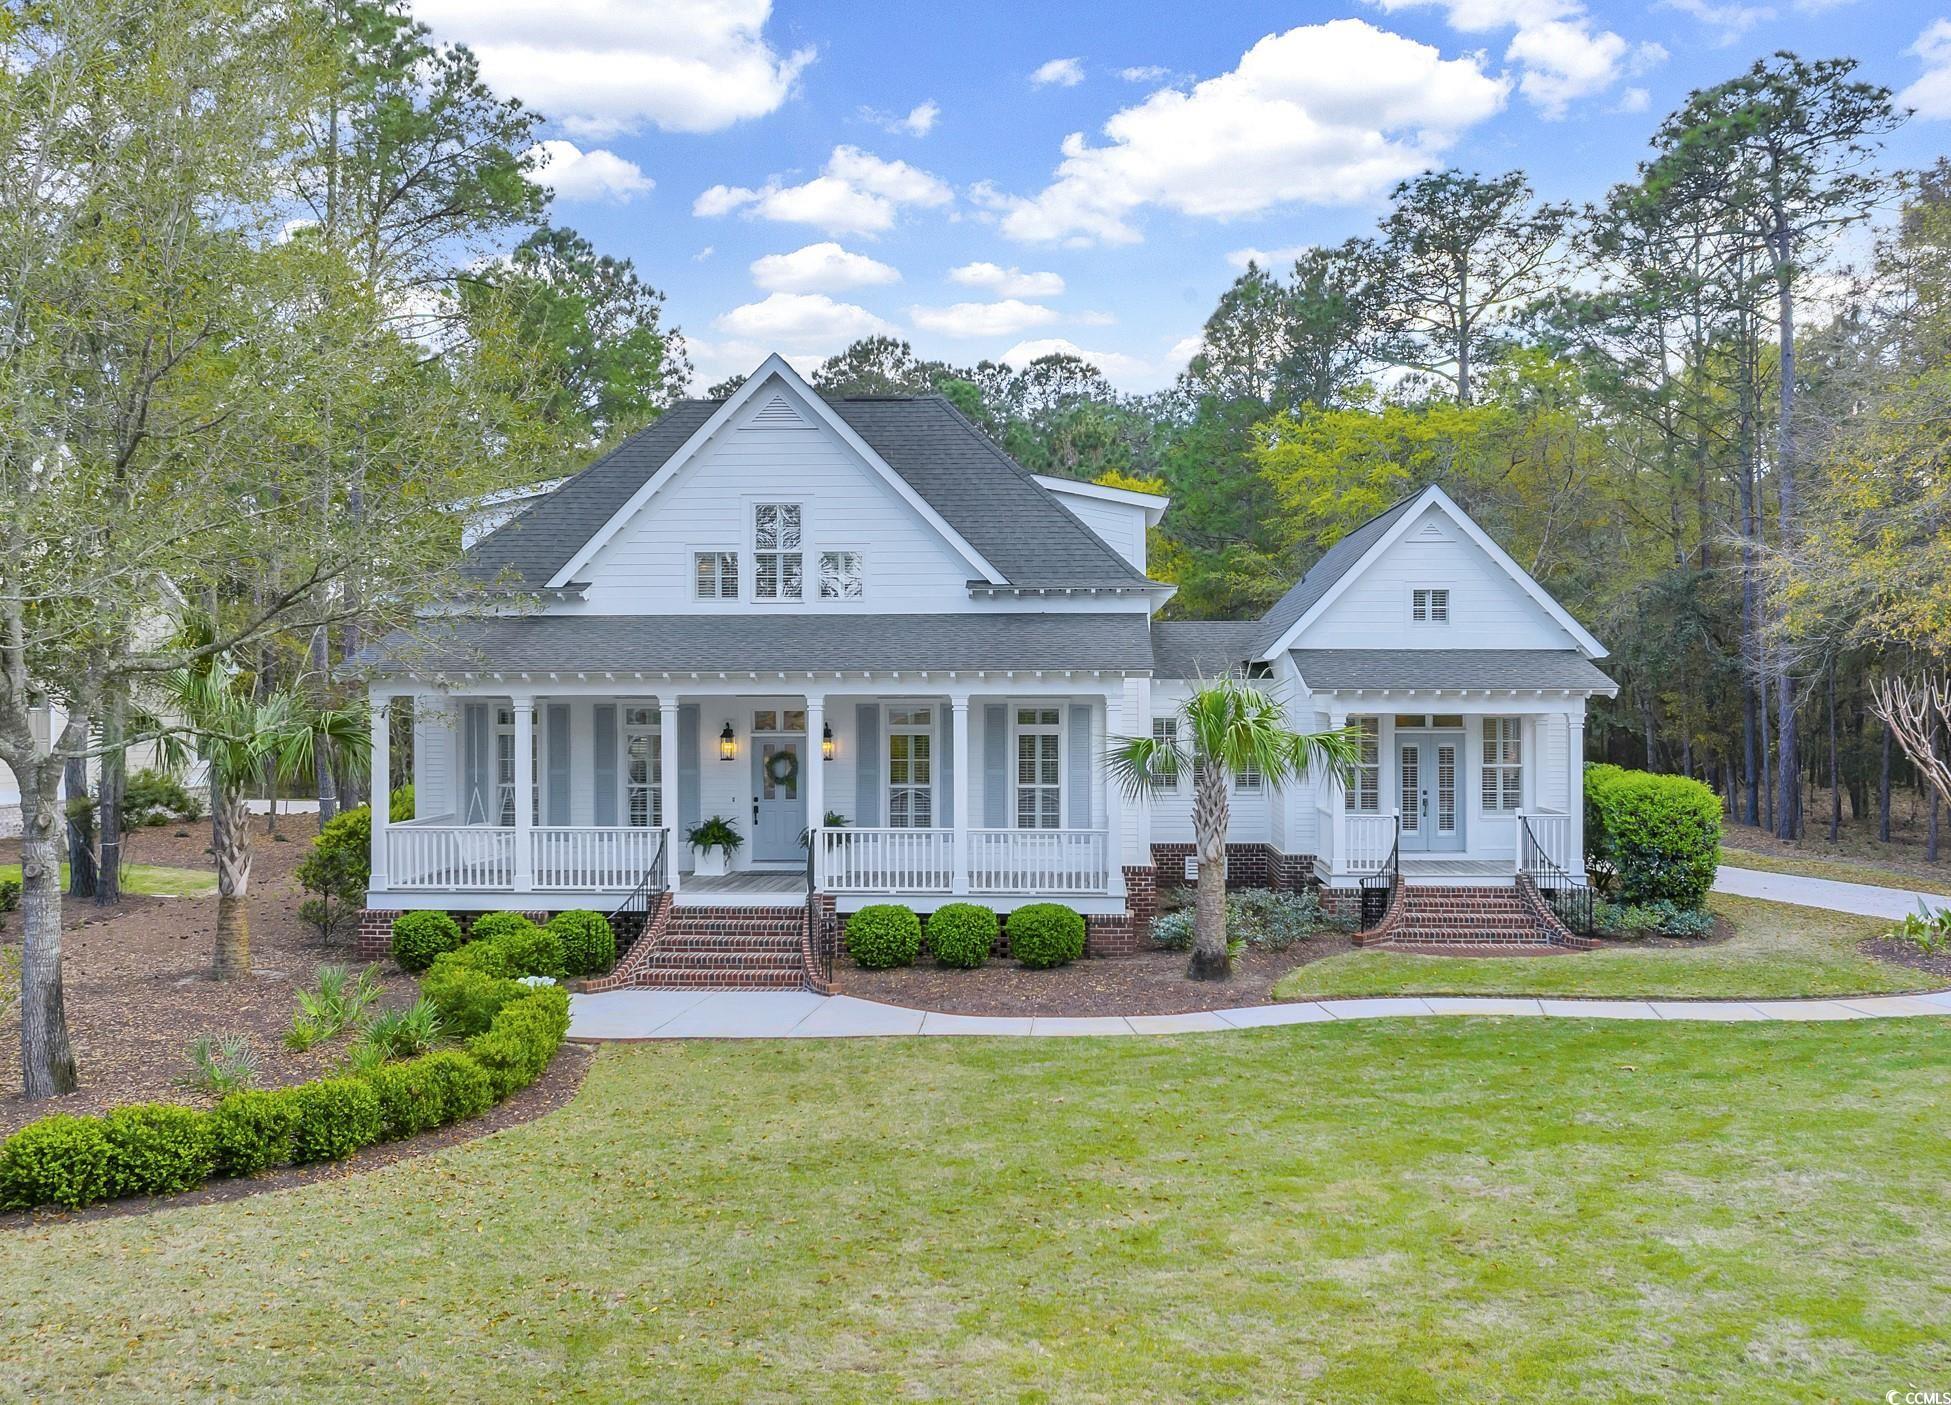 exquisite southern living style home located in the highly desirable pawleys island community of the reserve. upon arrival you are greeted by the large welcoming front porch perfect for an afternoon with friends or family. this incredibly well-maintained home is move in ready for the buyer looking for luxury in the low country. the detached carriage house can serve as a private guest oasis or the perfect home office. residents of the reserve enjoy access to litchfield by the sea, a gated beachfront community. the reserve is also home to a greg norman private golf course, as well as the safe harbor marina. memberships are available to purchase separately.  close to shopping and fine dining, pawleys island is just 70 miles to historic charleston, sc or 25 miles to the attractions ofmyrtle beach!